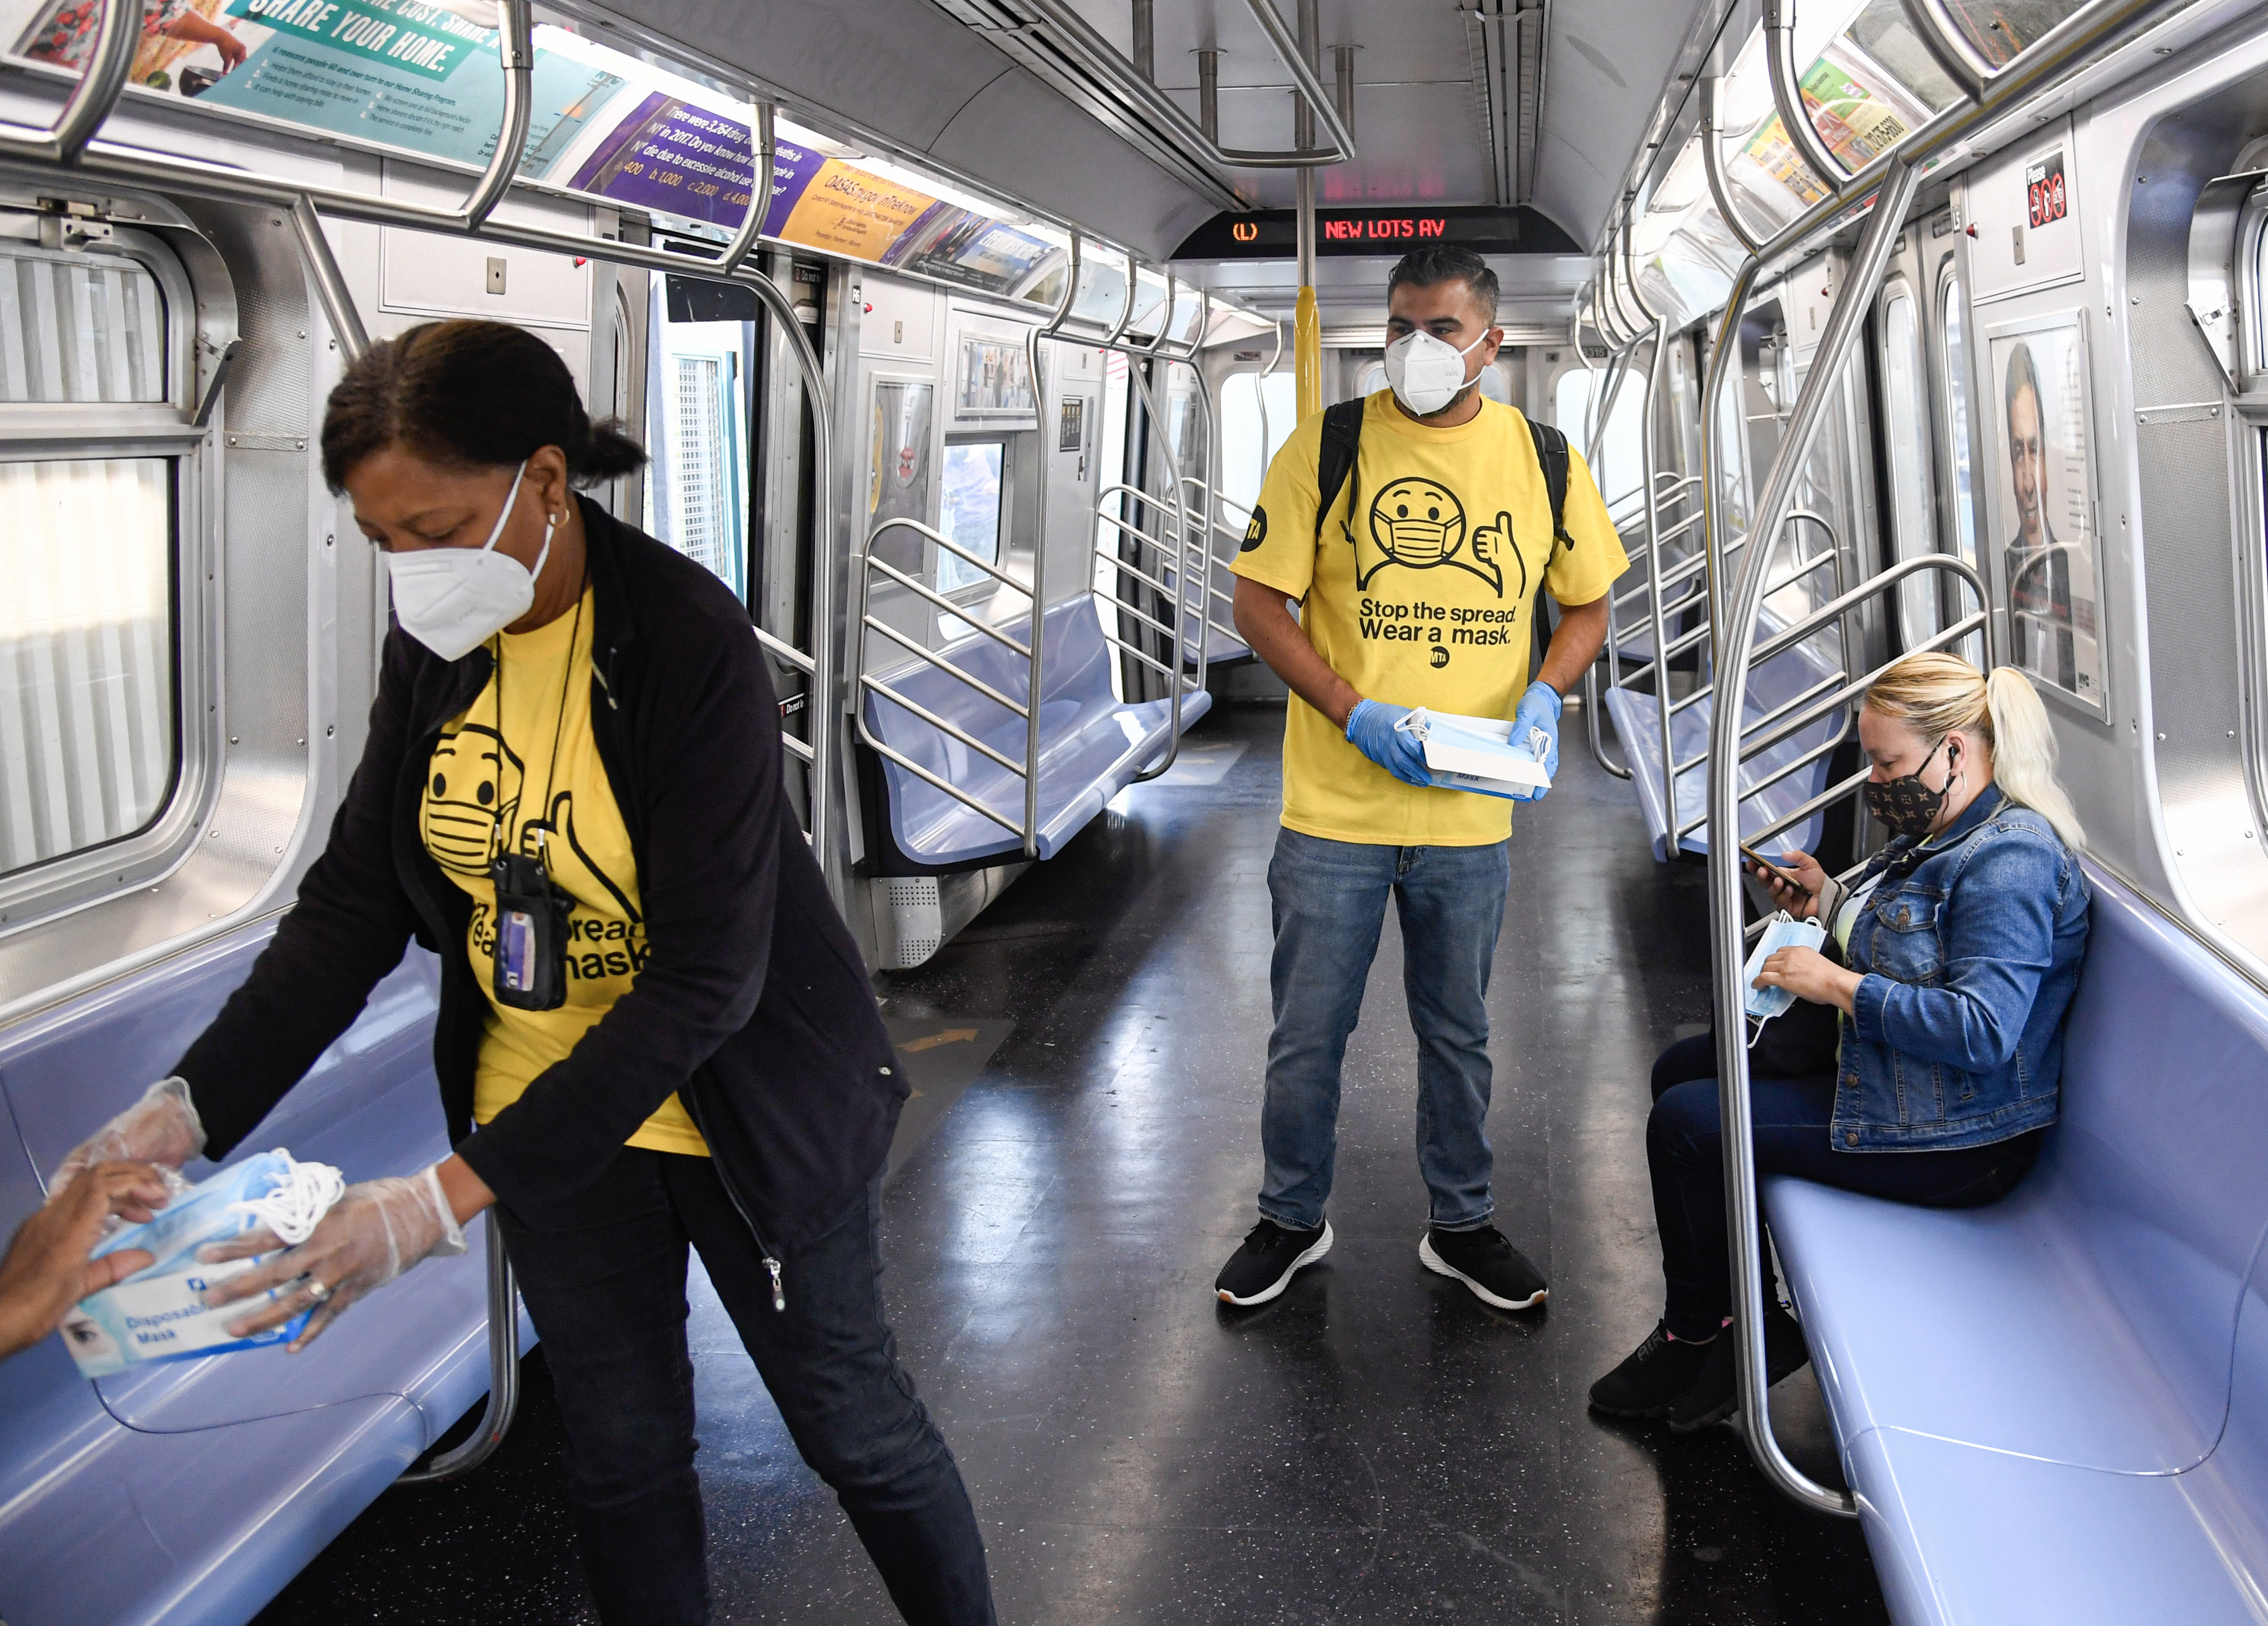 MTA Reminds Returning Riders That Masks Are Still Required on Public Transit